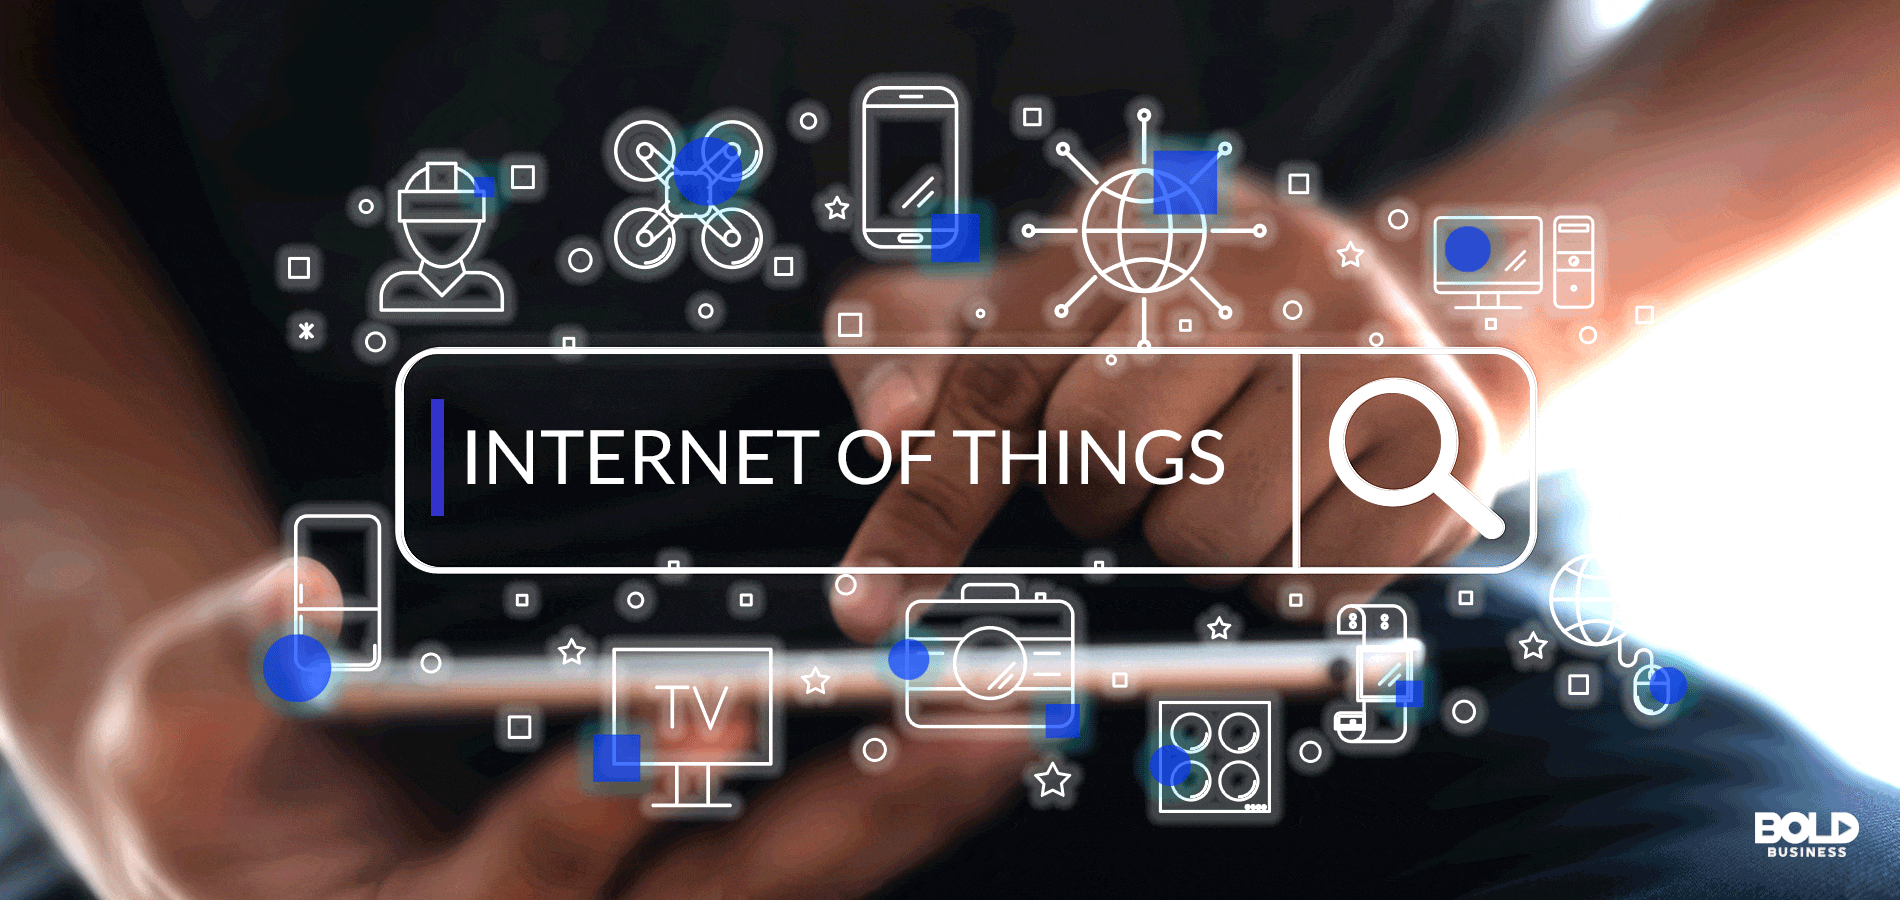 Internet of Things is Now Shaking up the World. Learn How!